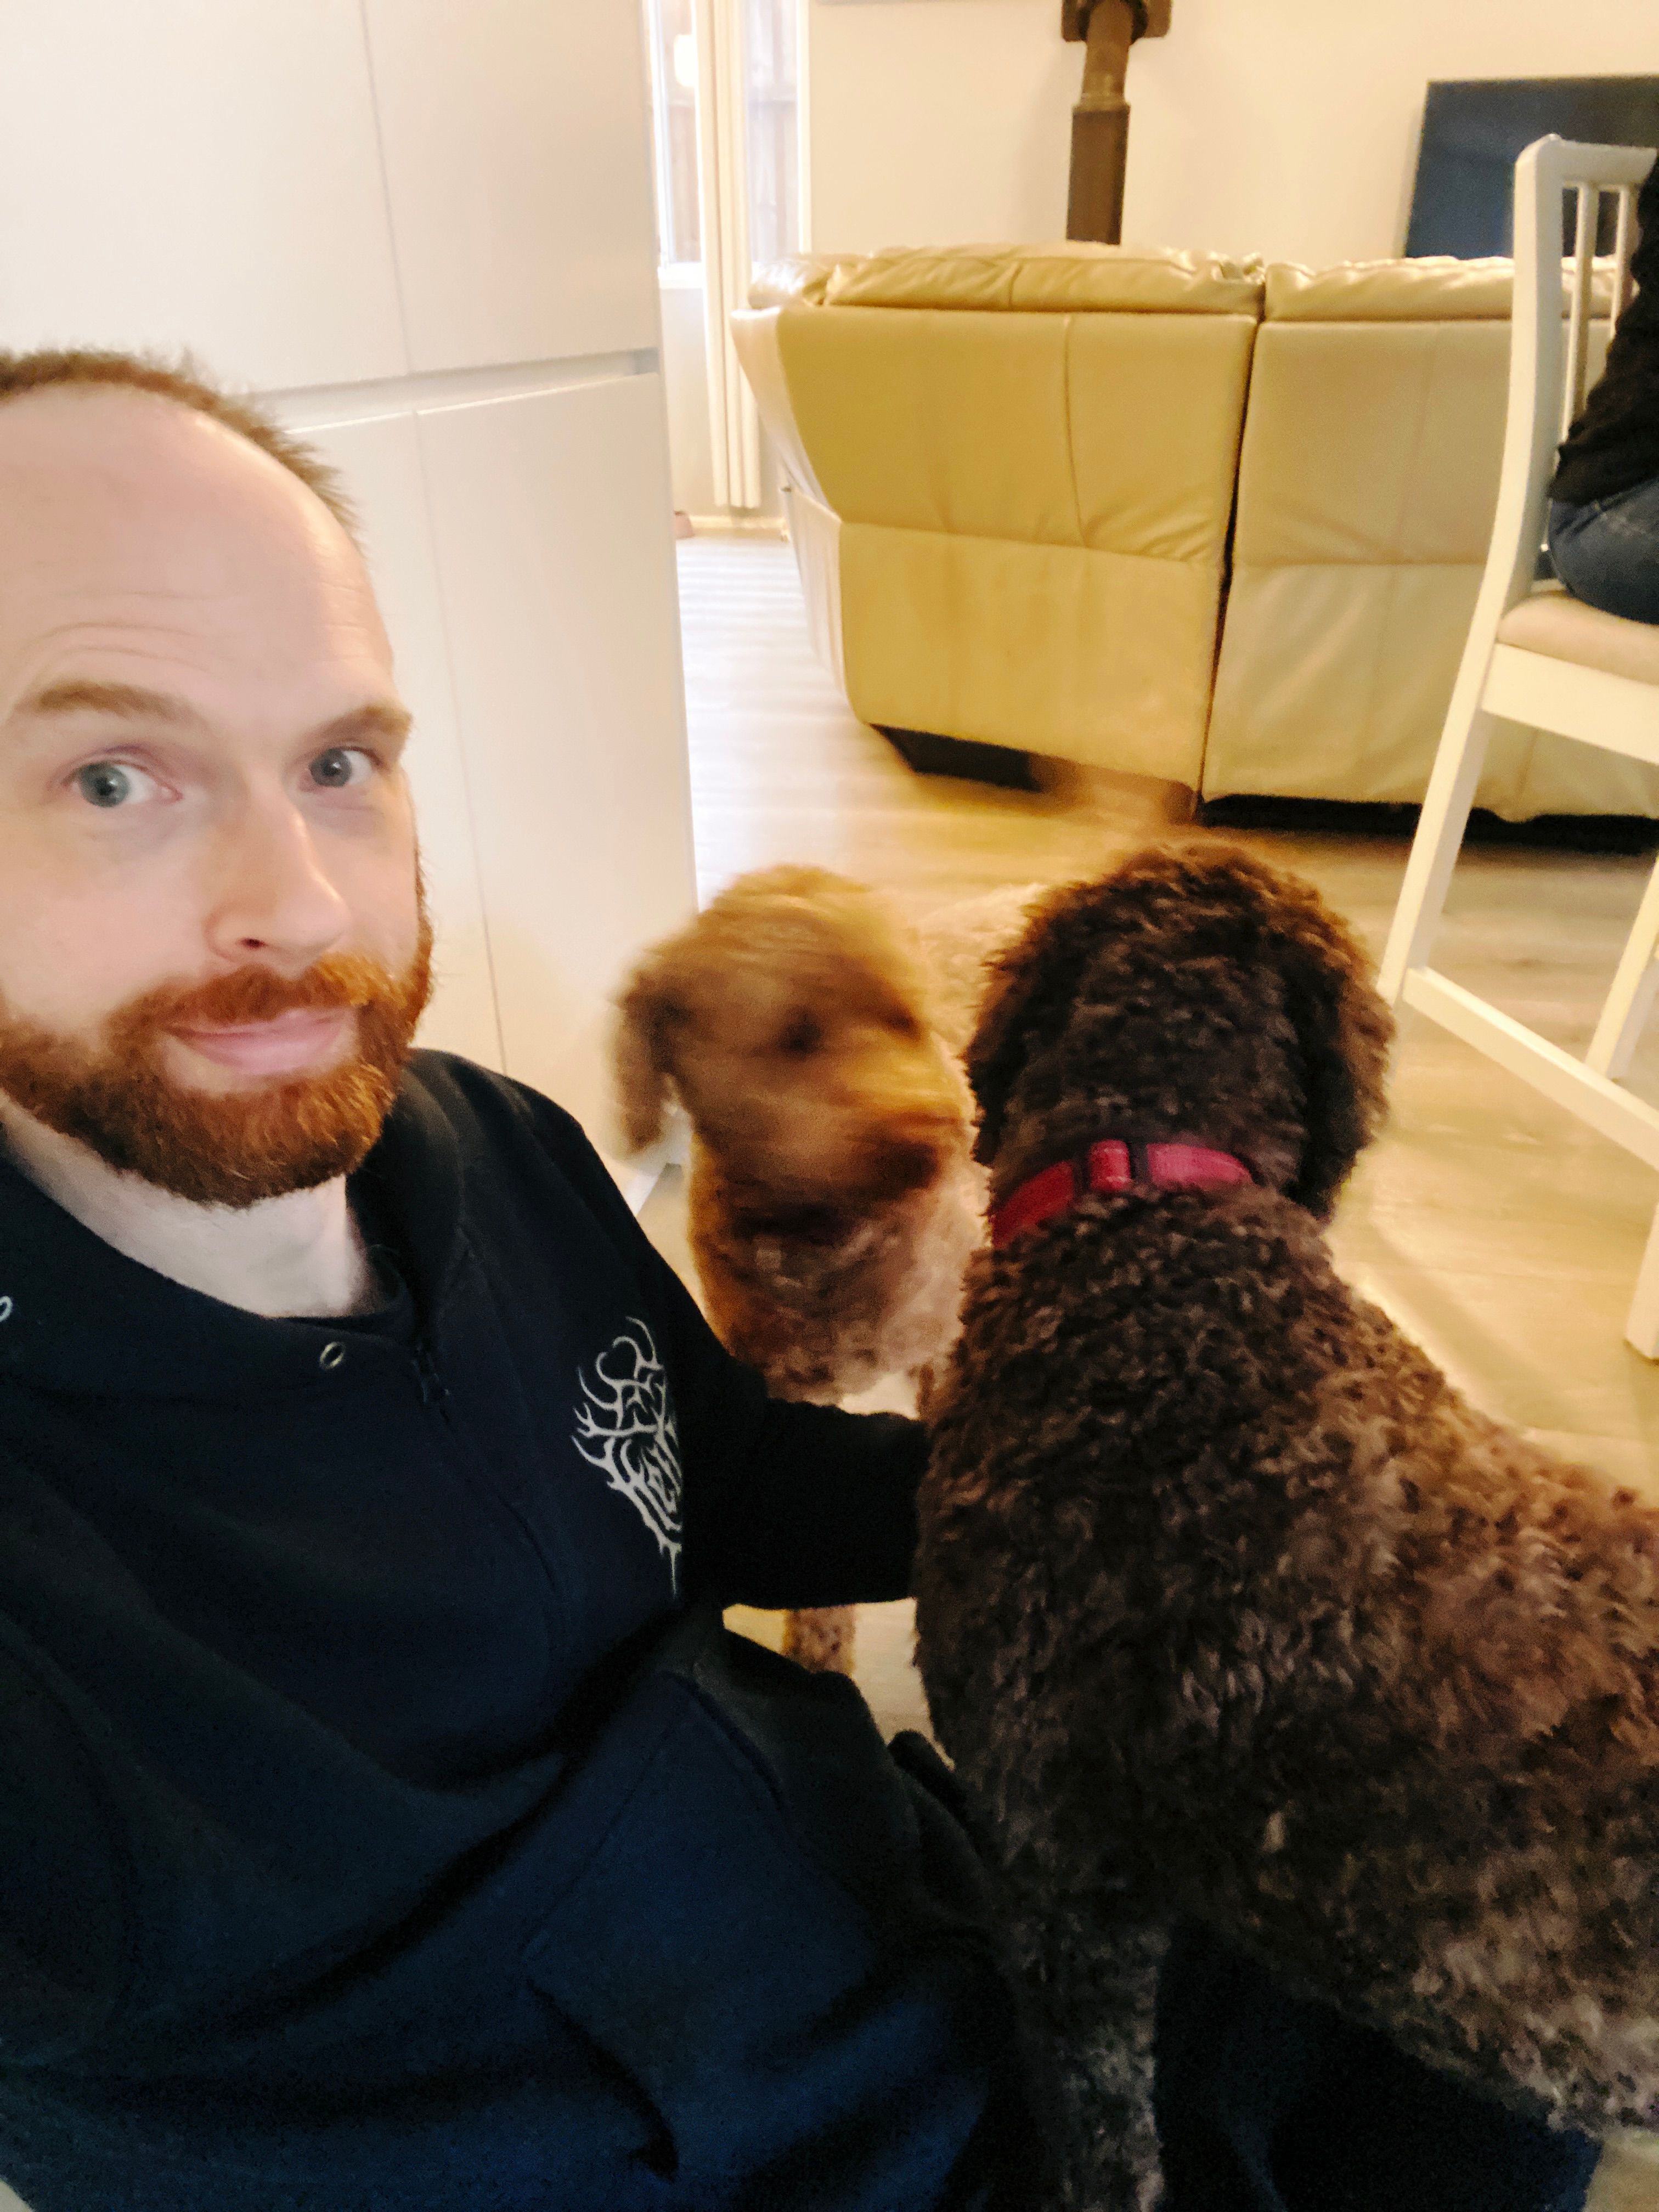 A selfie of me, a white man with an increasingly scruffy beard and brown hair. I'm smiling at the camera while a brown labradoodle is sitting with her butt and back legs on my lap, and a second tan one is mid-movement on my left.